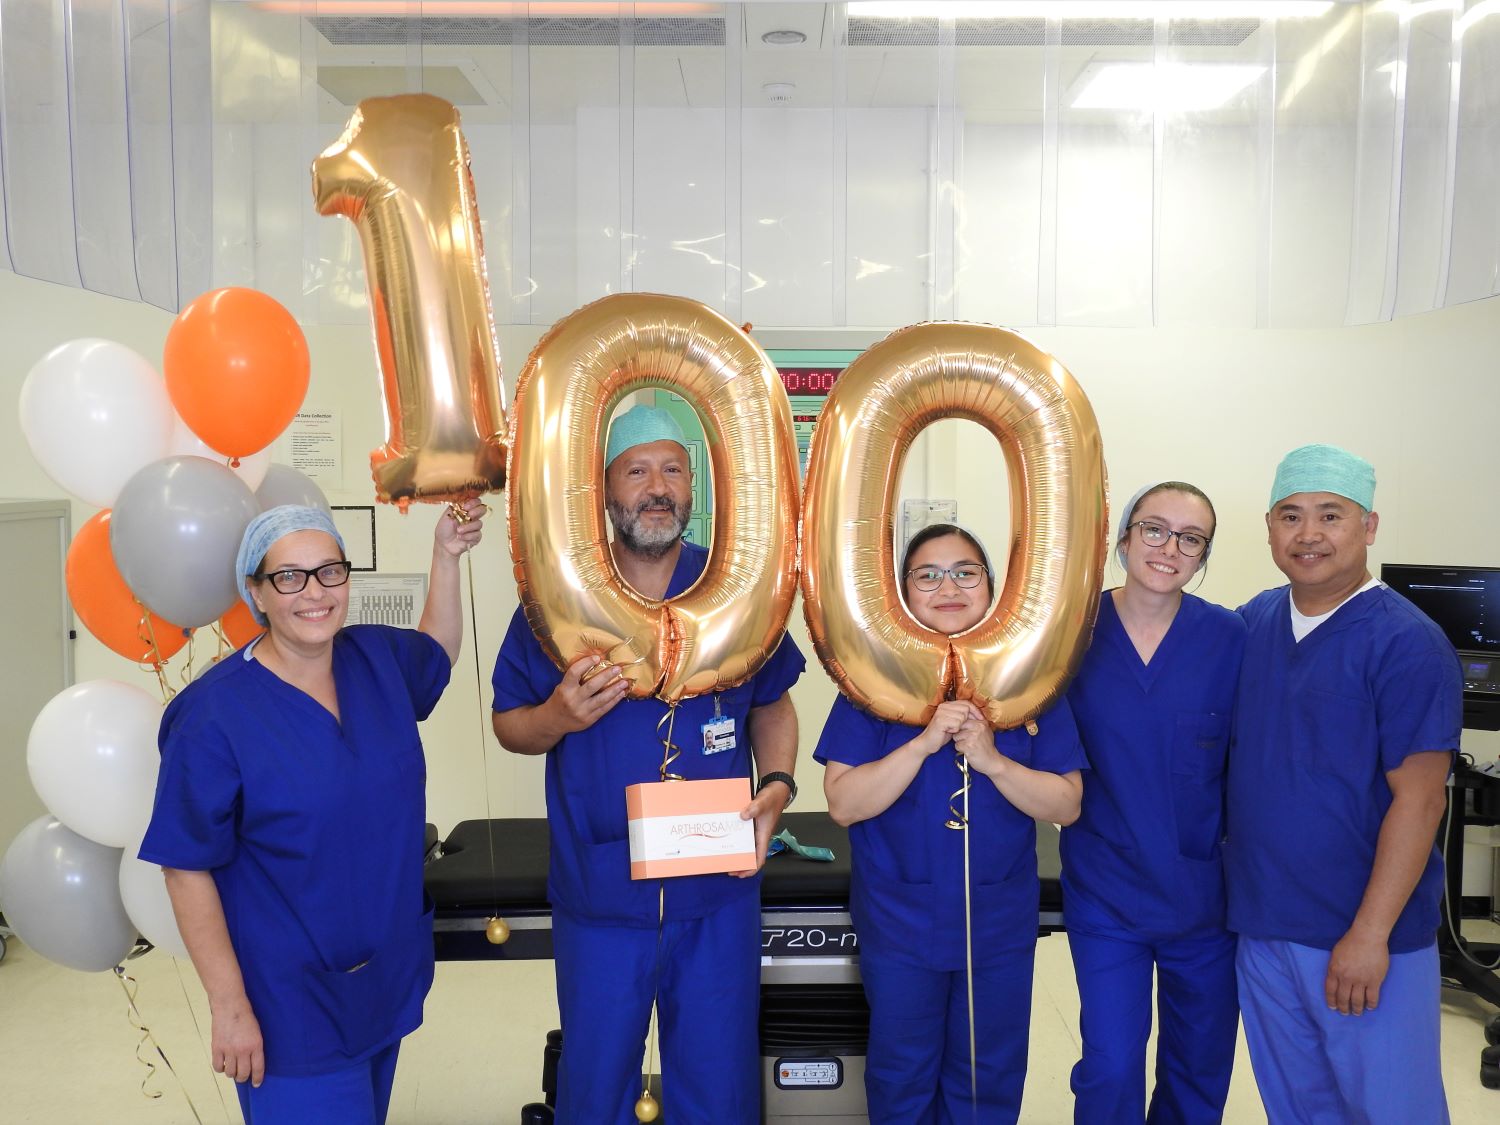 Professor Ali Ghoz and team celebrating the treatment of 100 patients with Arthrosamid